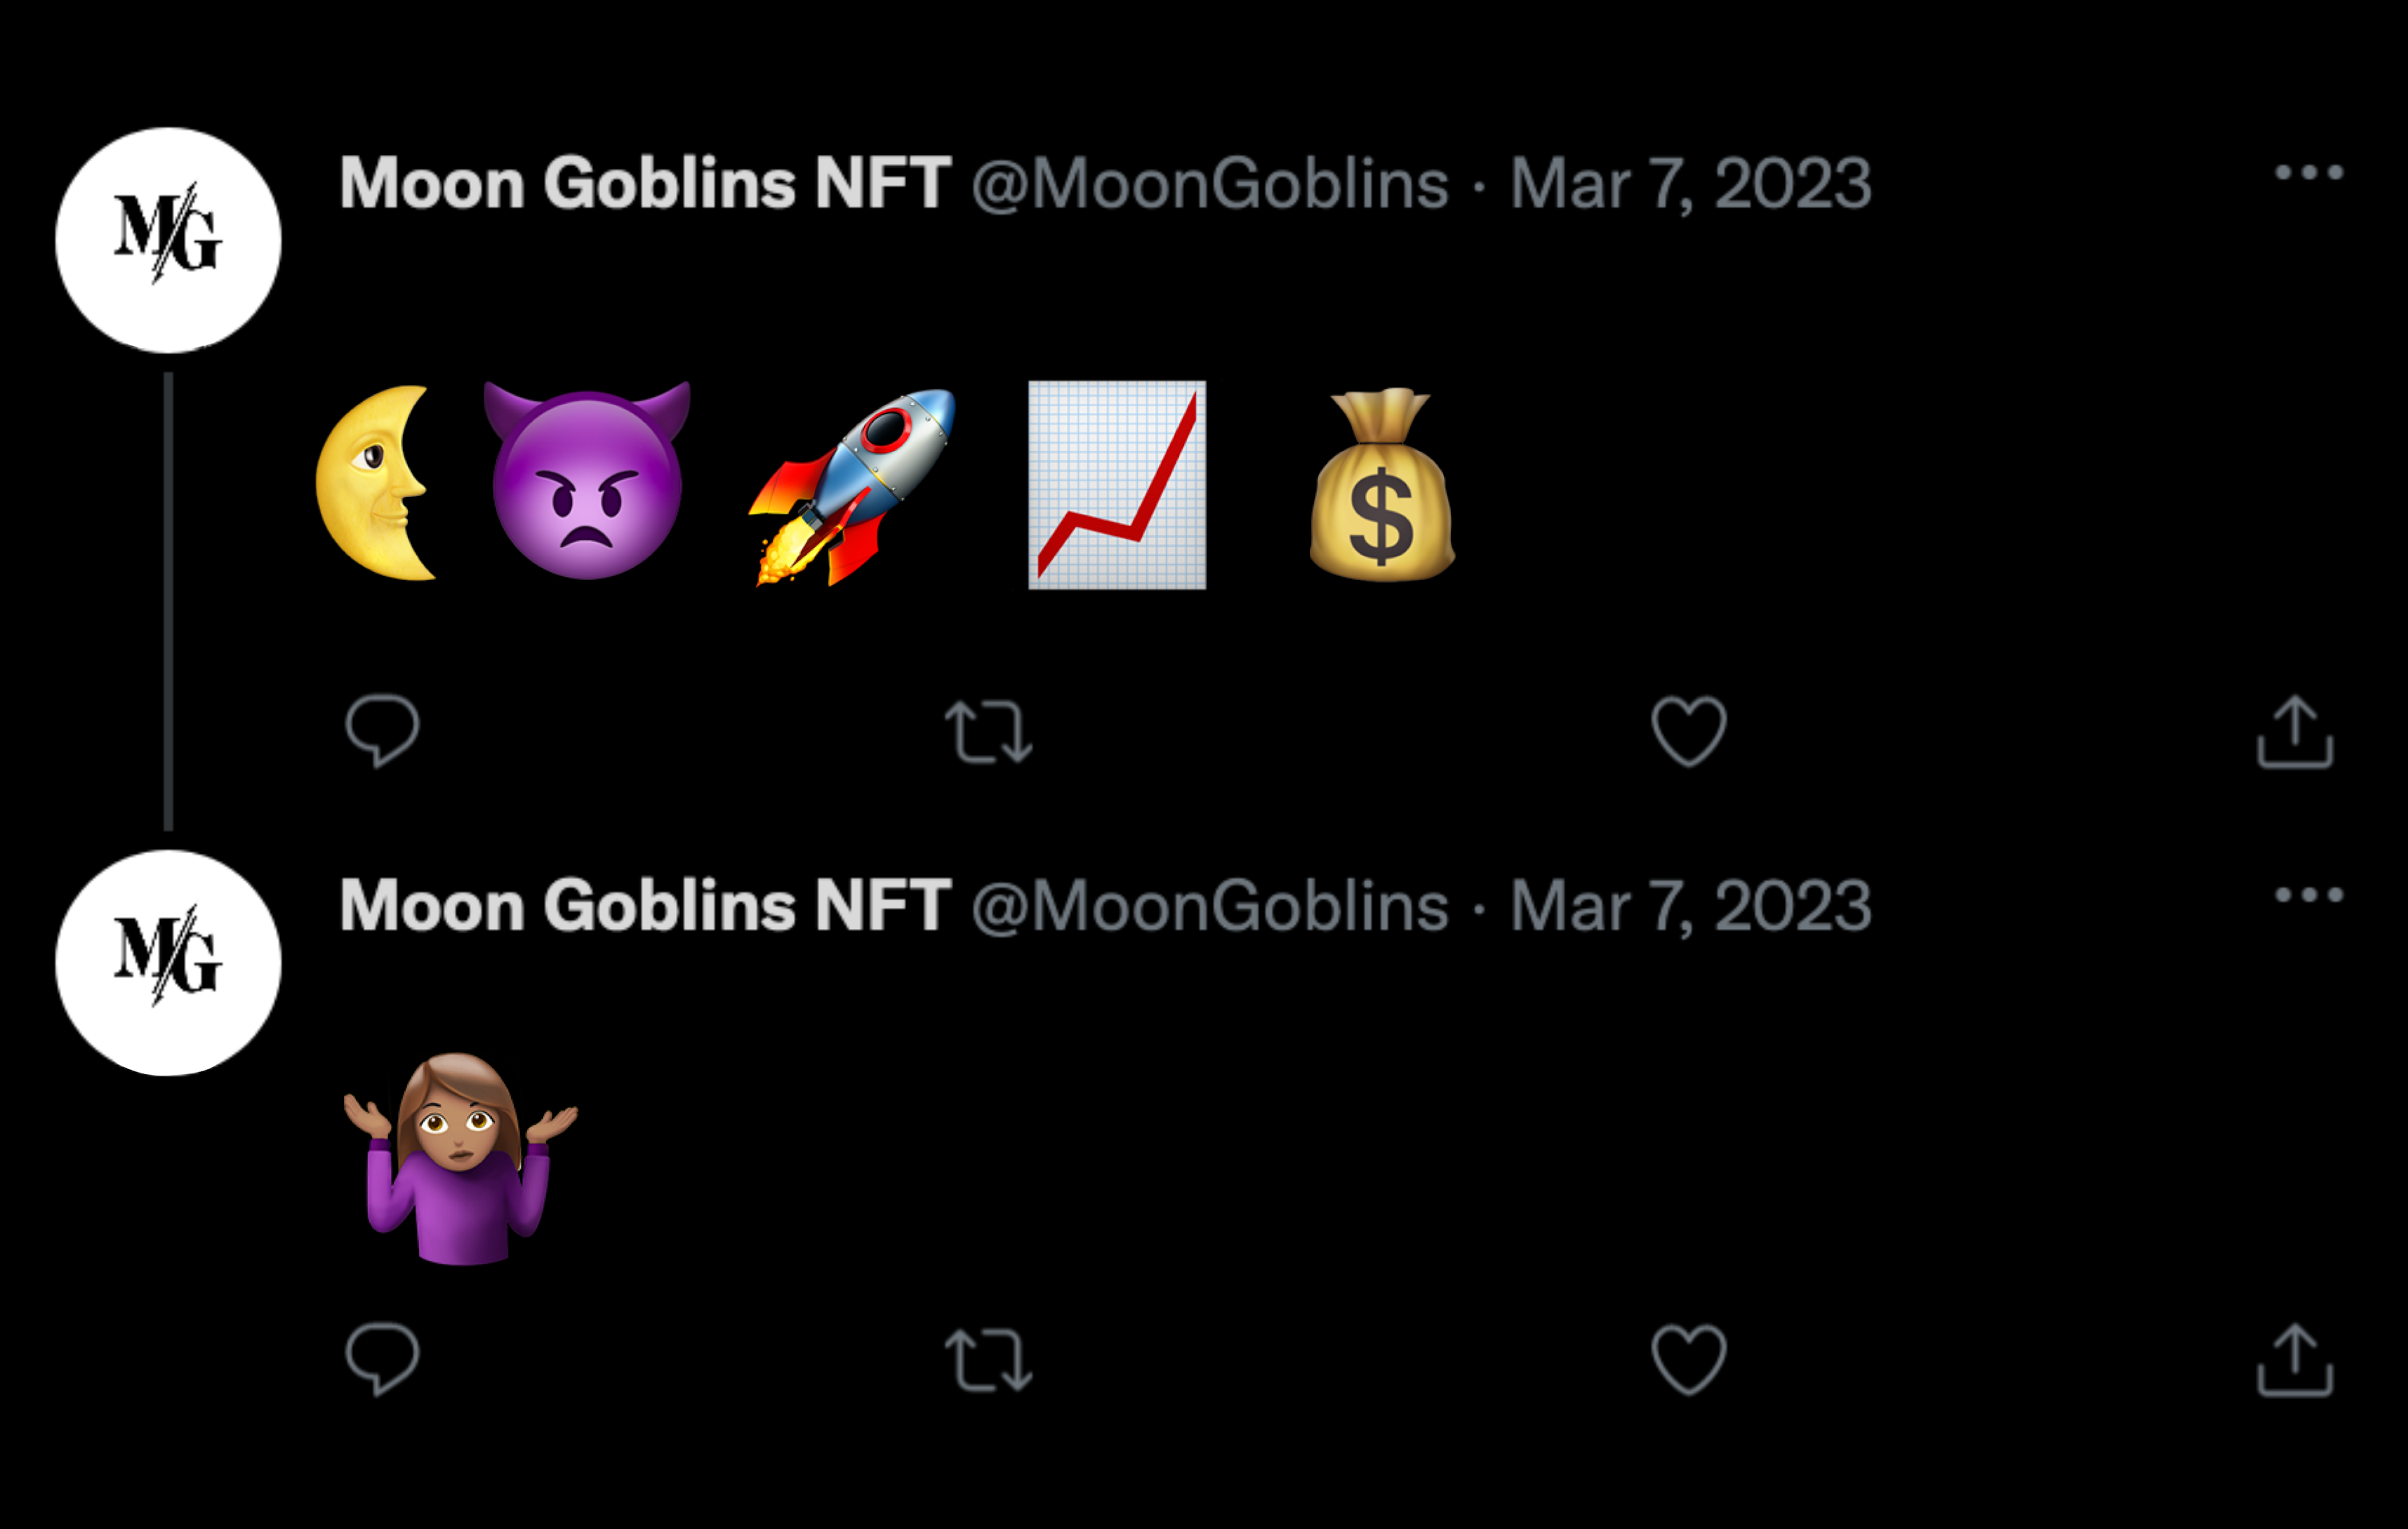 A tweet from the Moon Goblins team.